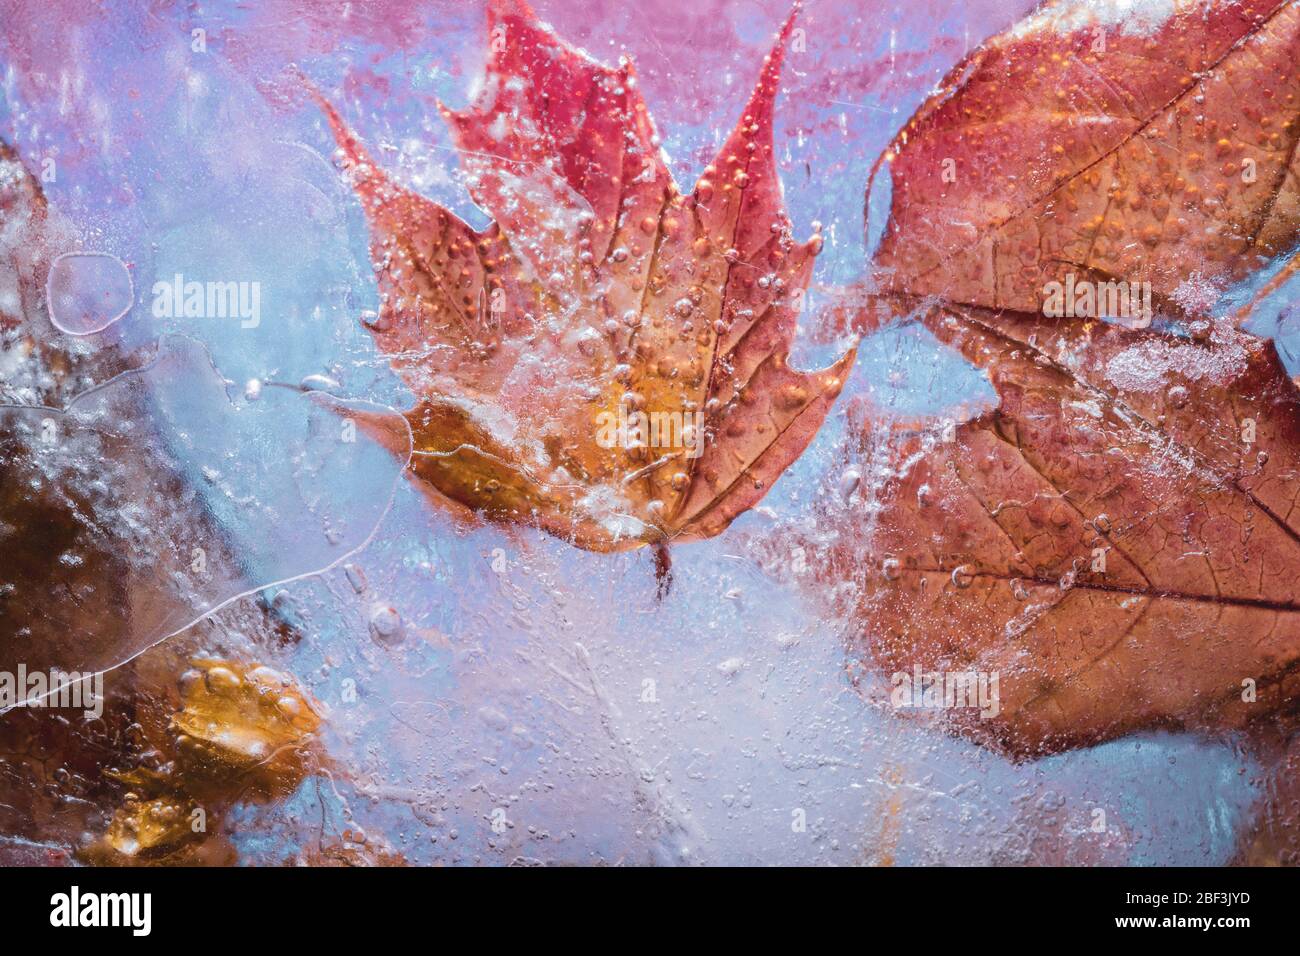 Maple leaves freeze plate in red-yellow tones: creative background Stock Photo